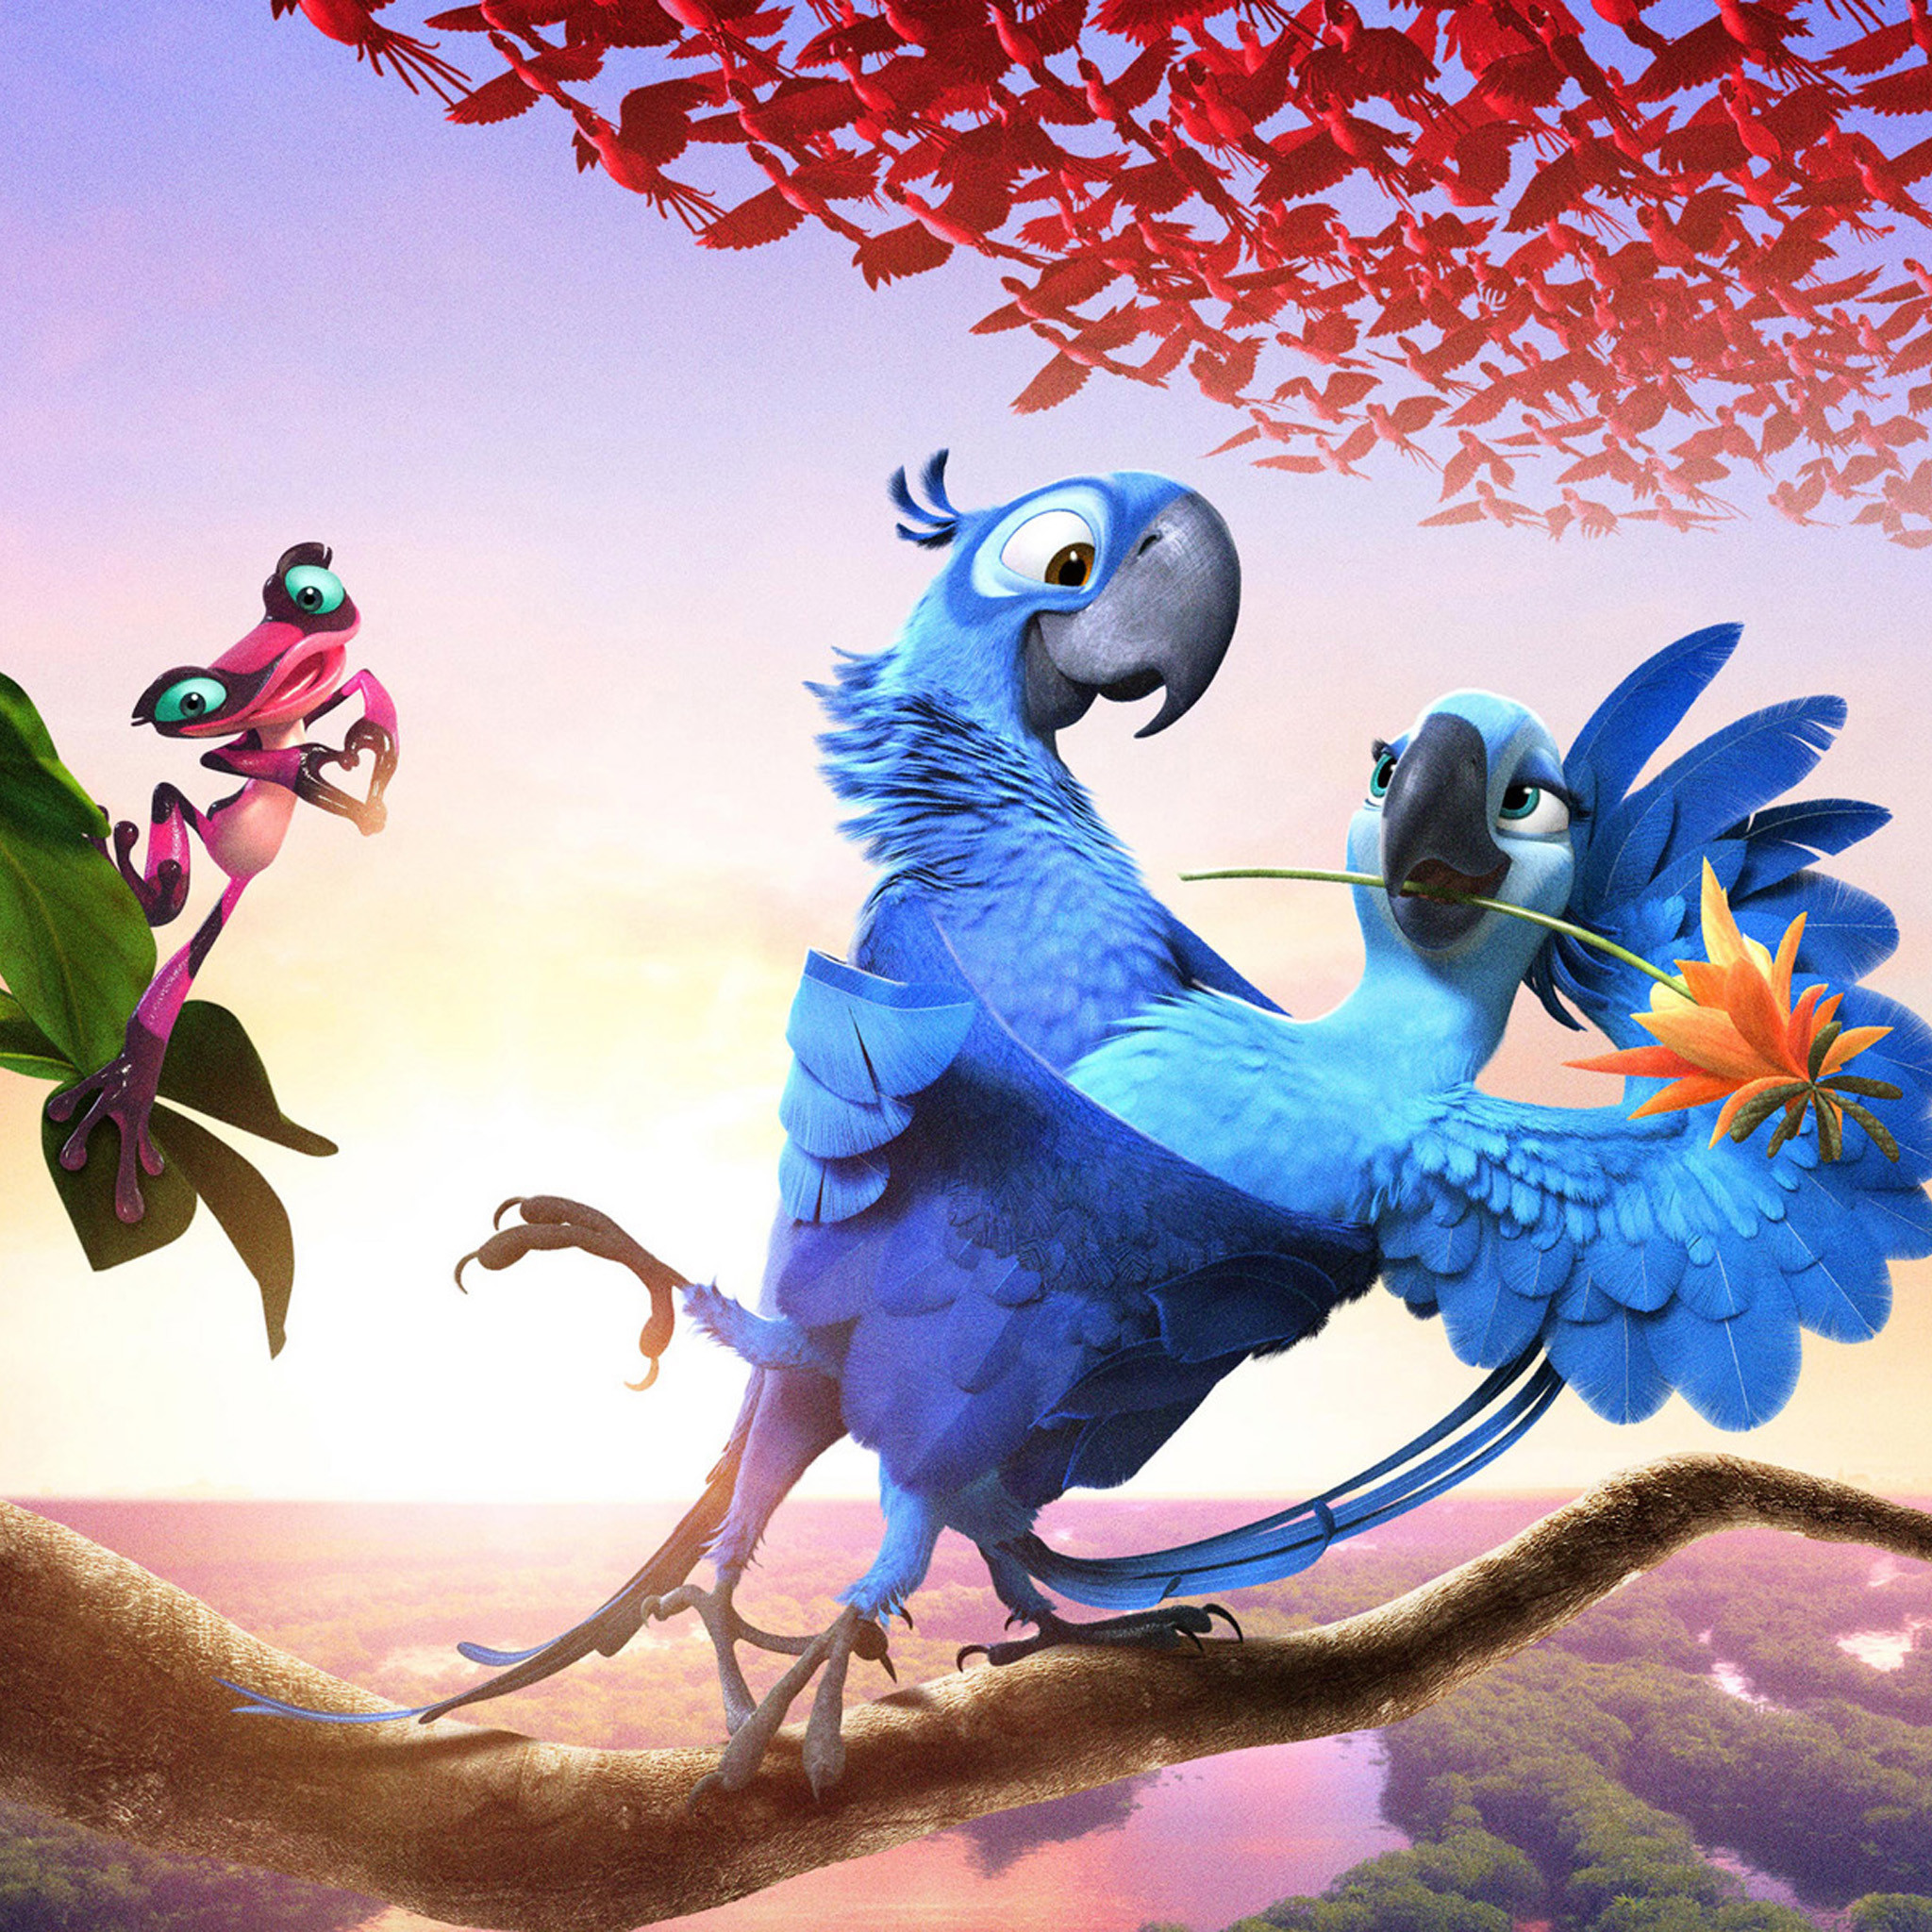 hd wallpapers for ipad air 2,bird,parrot,macaw,illustration,animation